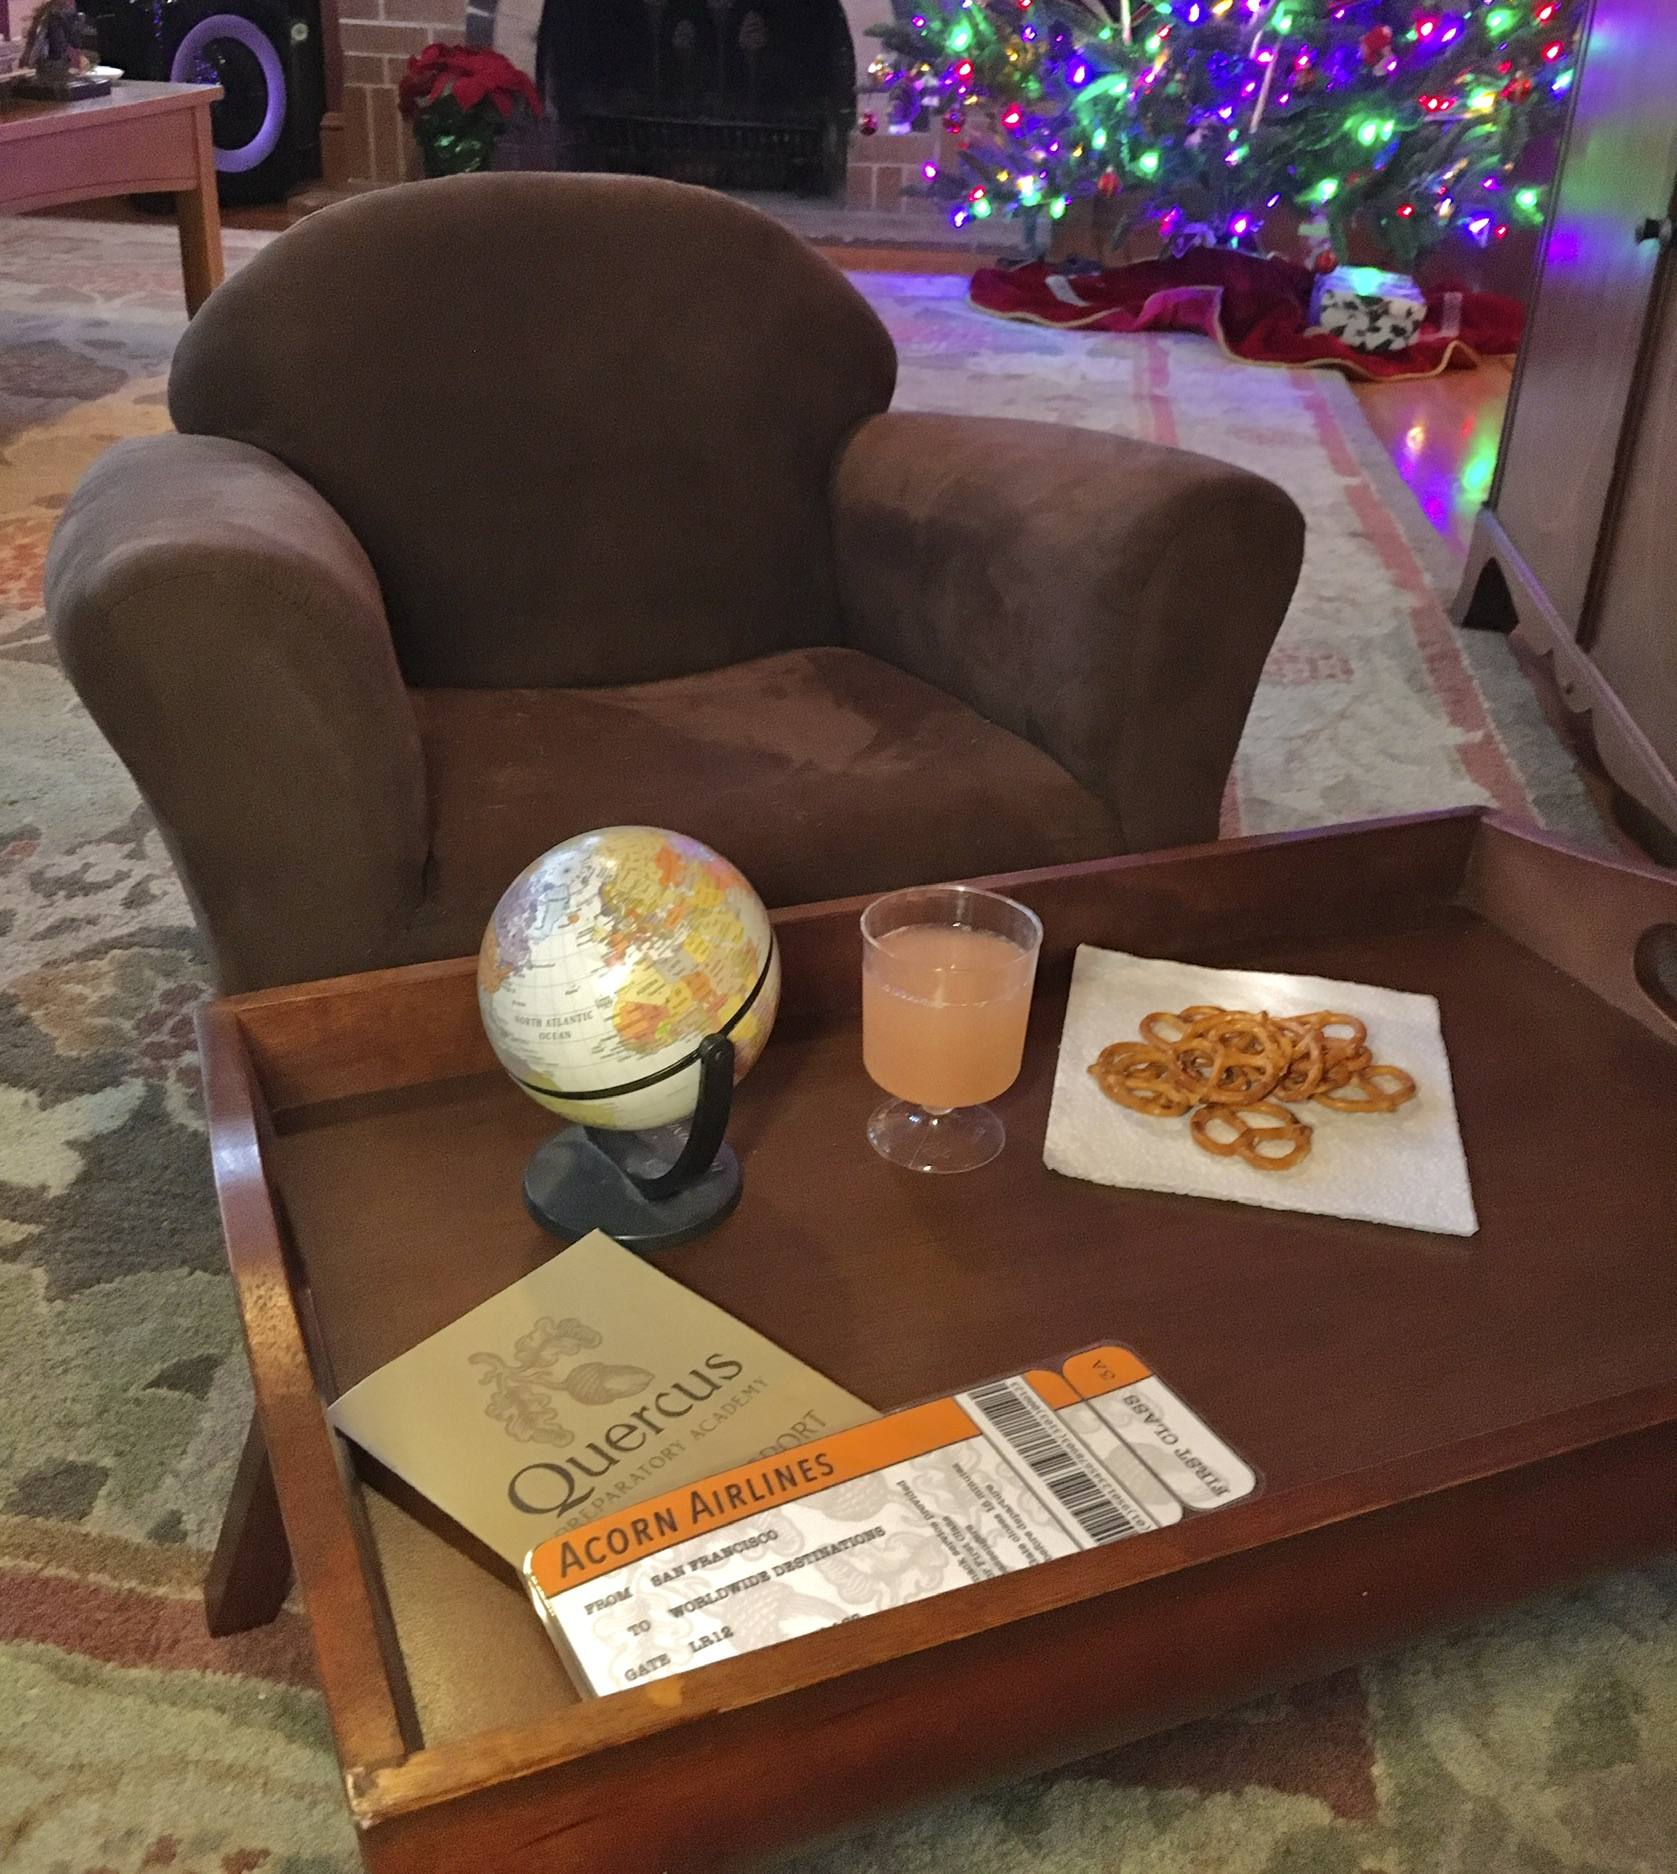 A child-size padded armchair, with a wooden tray in front holding a small drink, pretzels, a small globe, and our boarding pass and passport.